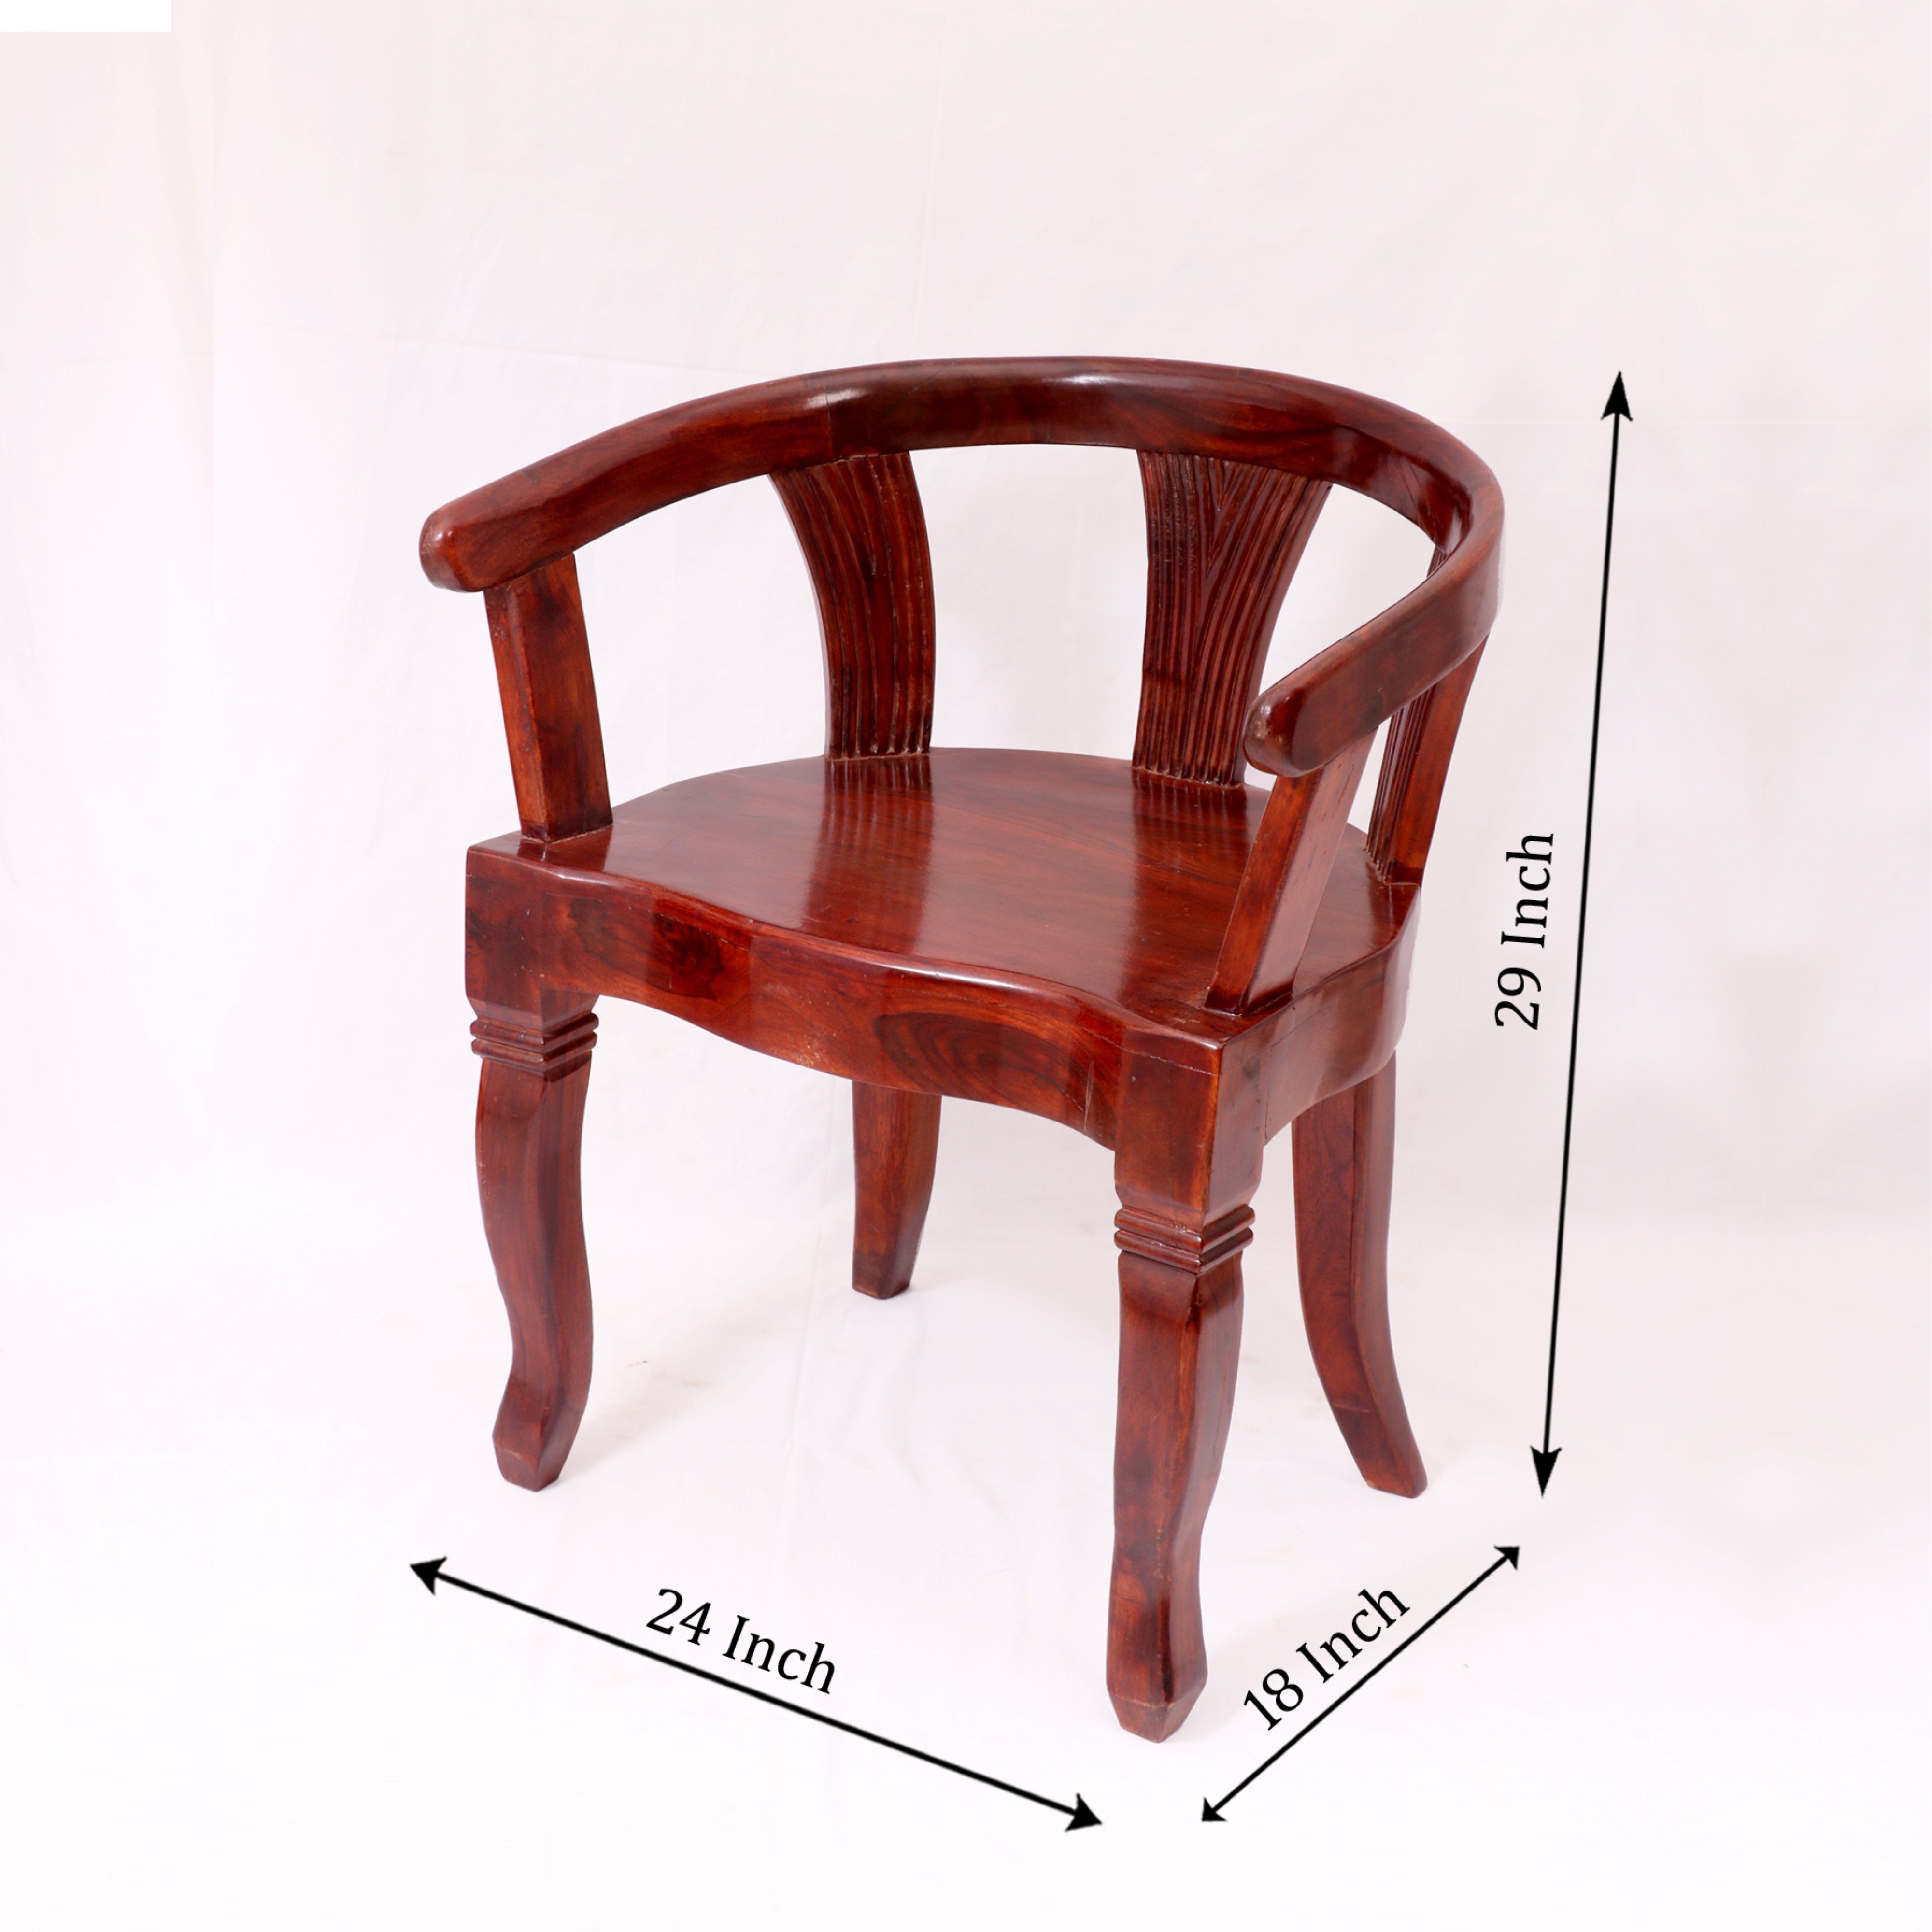 Mohagany Tone Rounded Arms Wooden Chair Arm Chair